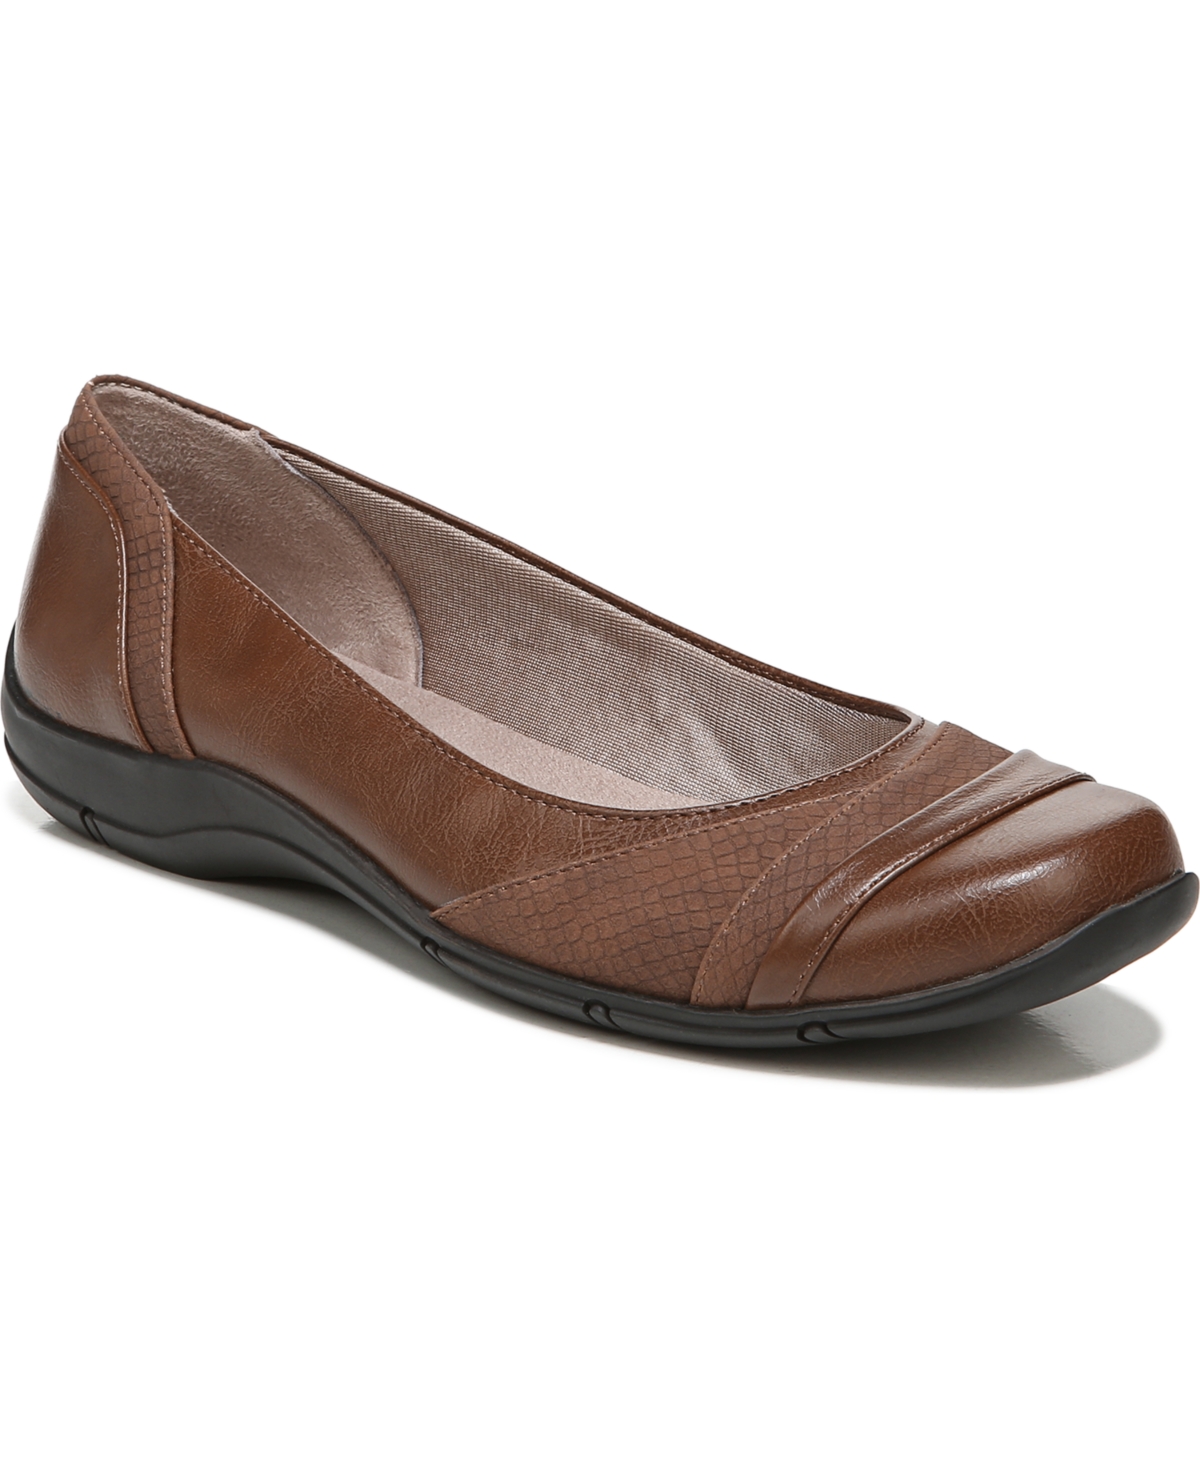 Dig Flats - Tan Faux Leather